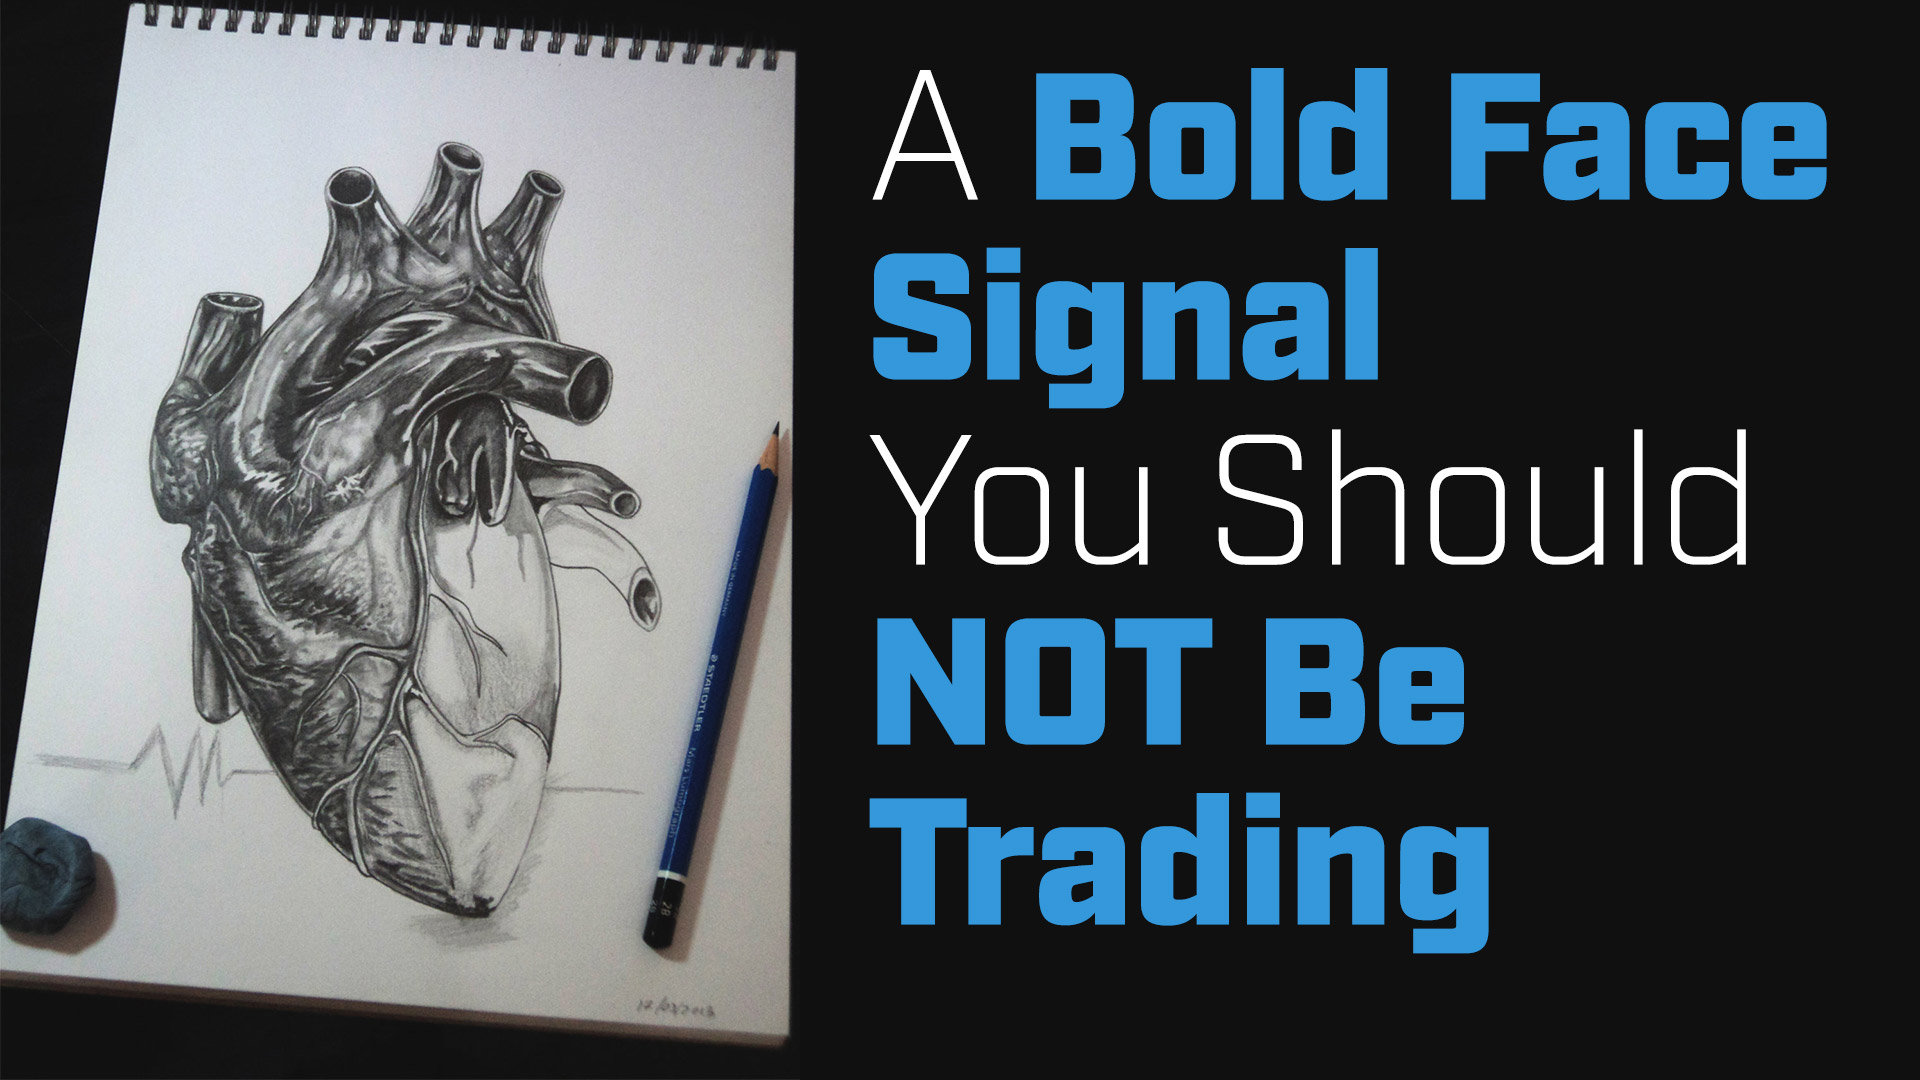 A Bold Face Signal You Should NOT Be Trading